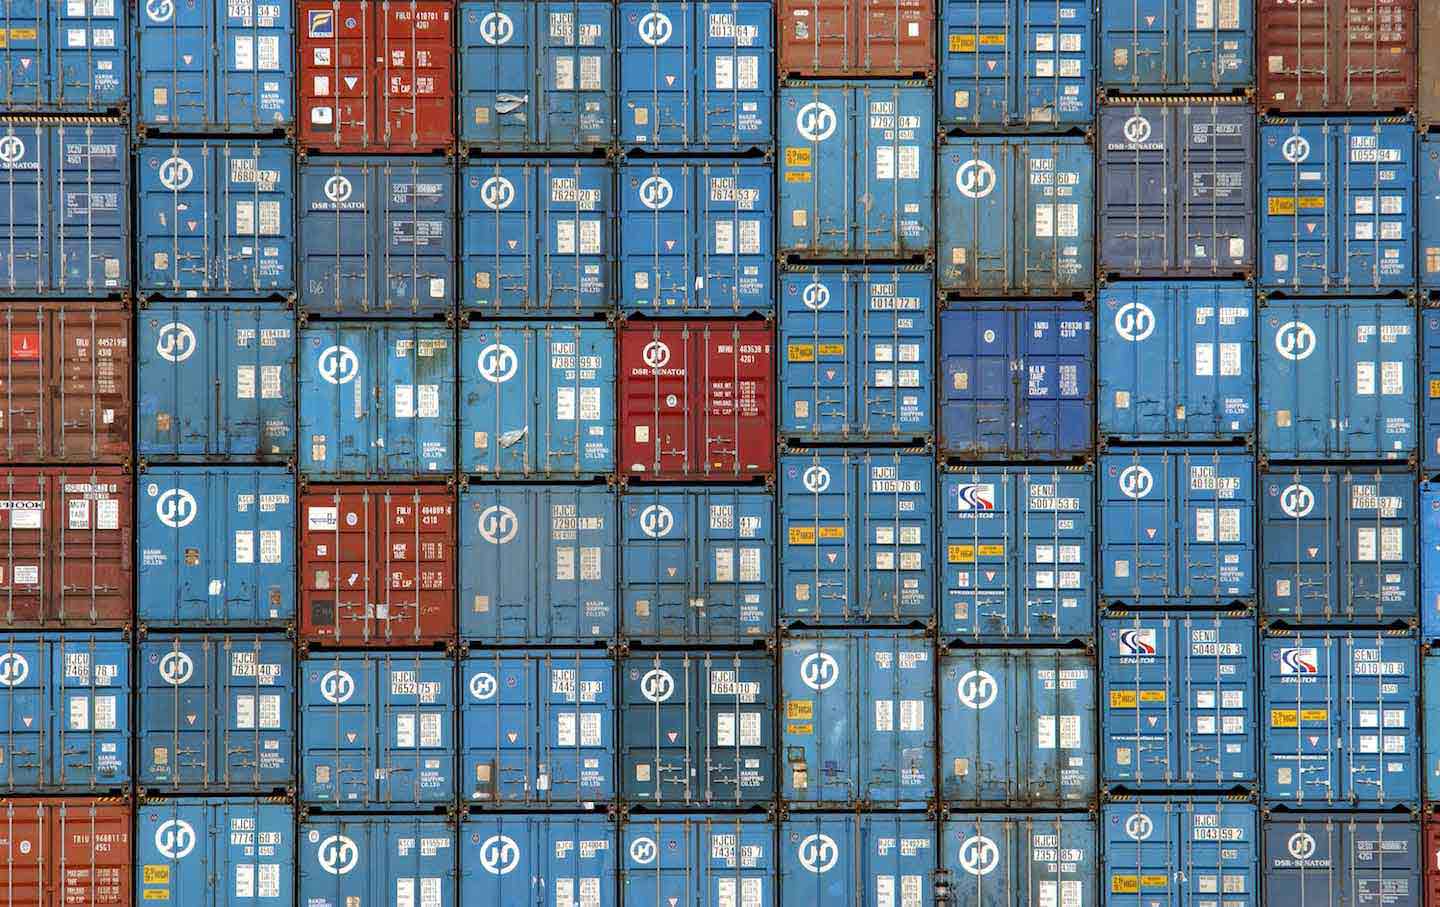 Thousands of truck-sized 30-ton shipping containers are stacked aboard the Hanjin Oslo freighter in the Port of Los Angeles, 2020.